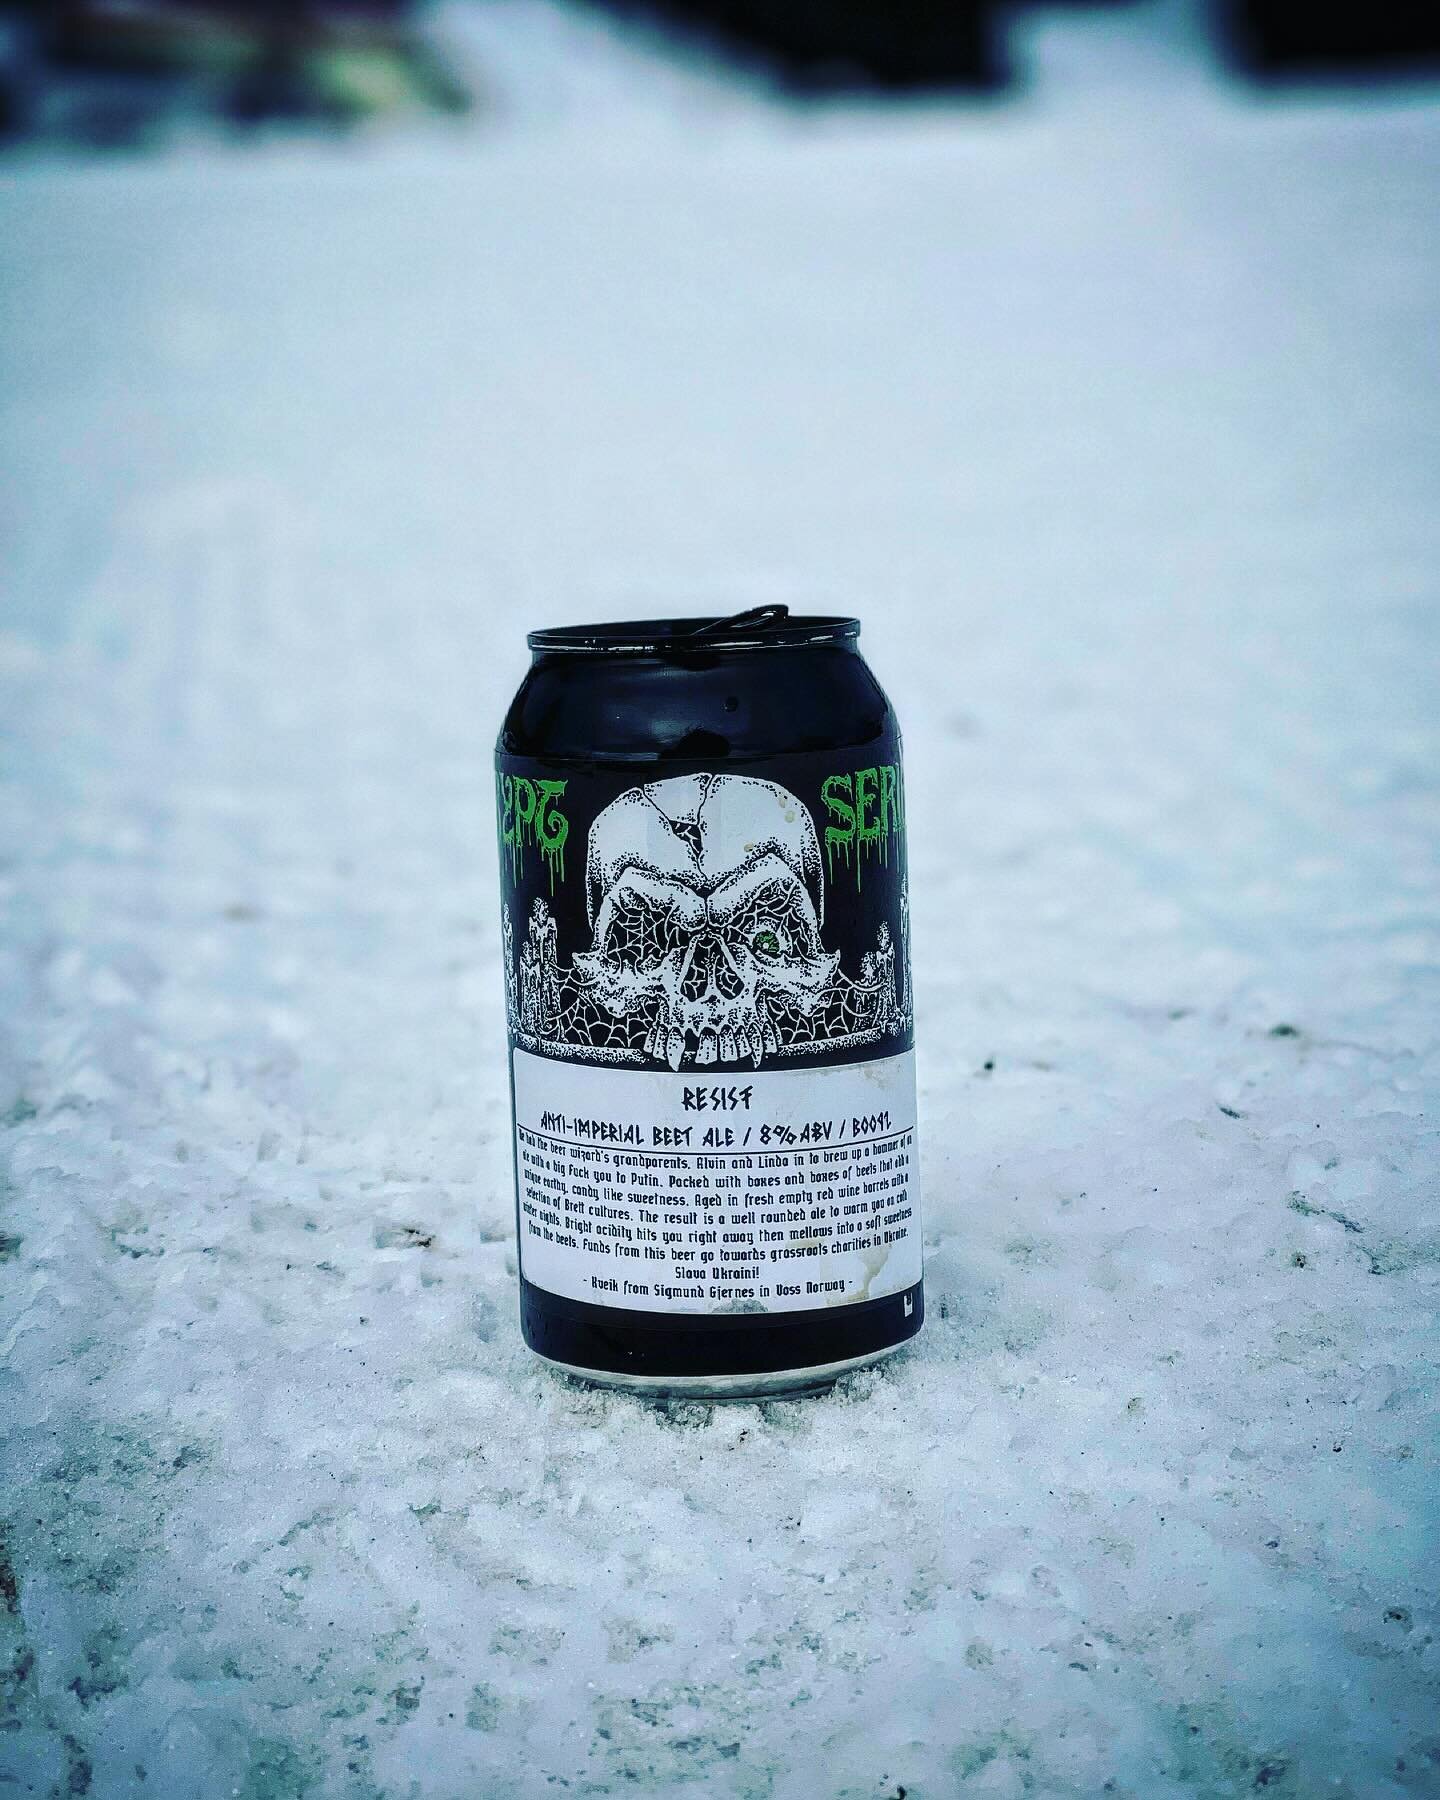 Here is some choice darkness against a snowy white backdrop, care of our friends @jackknifebrewing . This brew was an excellent companion in the Alpine💀💀⚡️⚡️